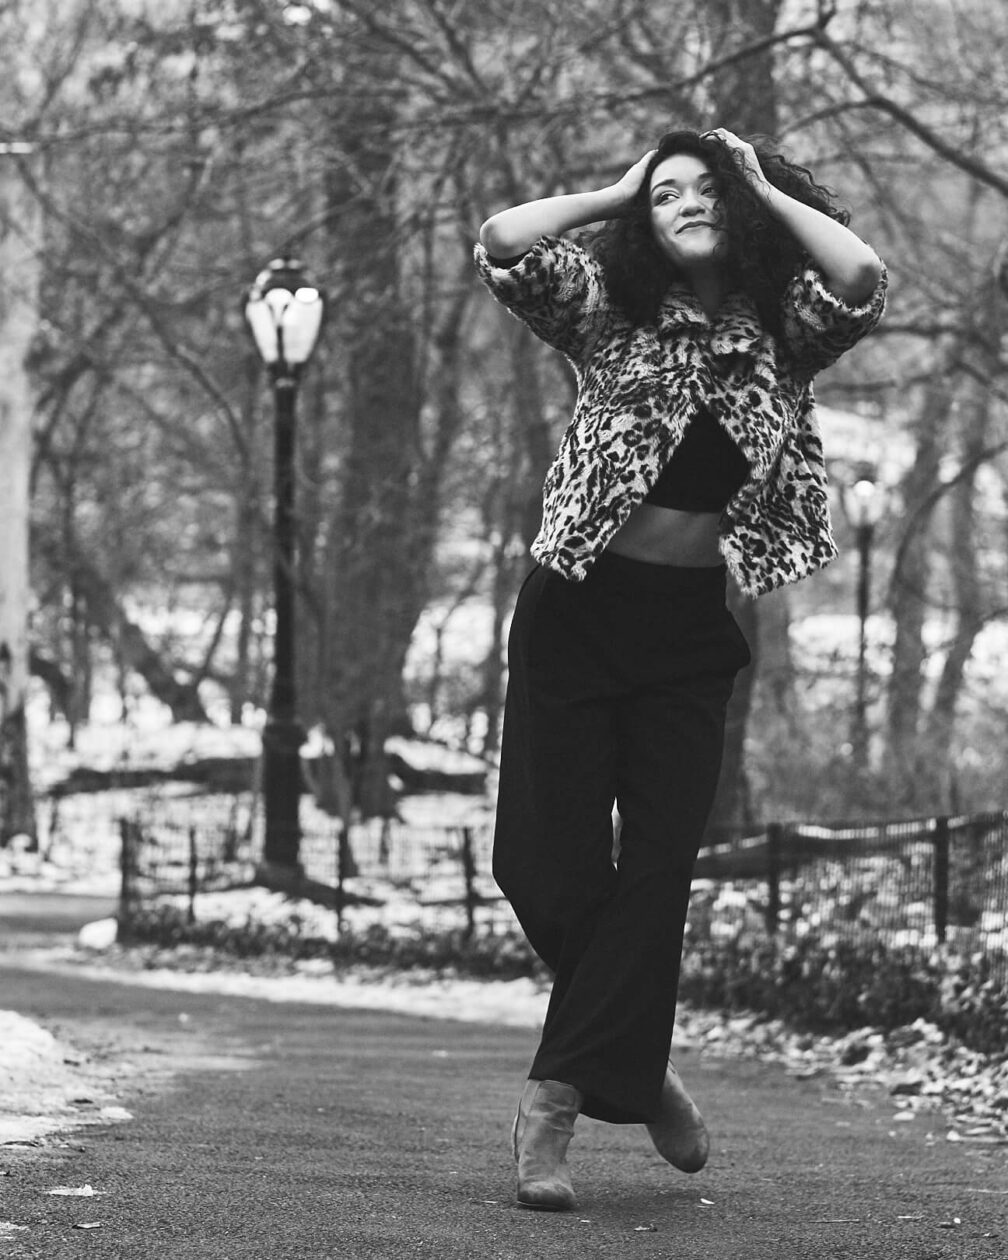 Fuji X Pro2 with xf 56mm f1.2 - Black and White Women's Fashion Photography in Central Park - Woman with leopard print jacket - Model: Jess